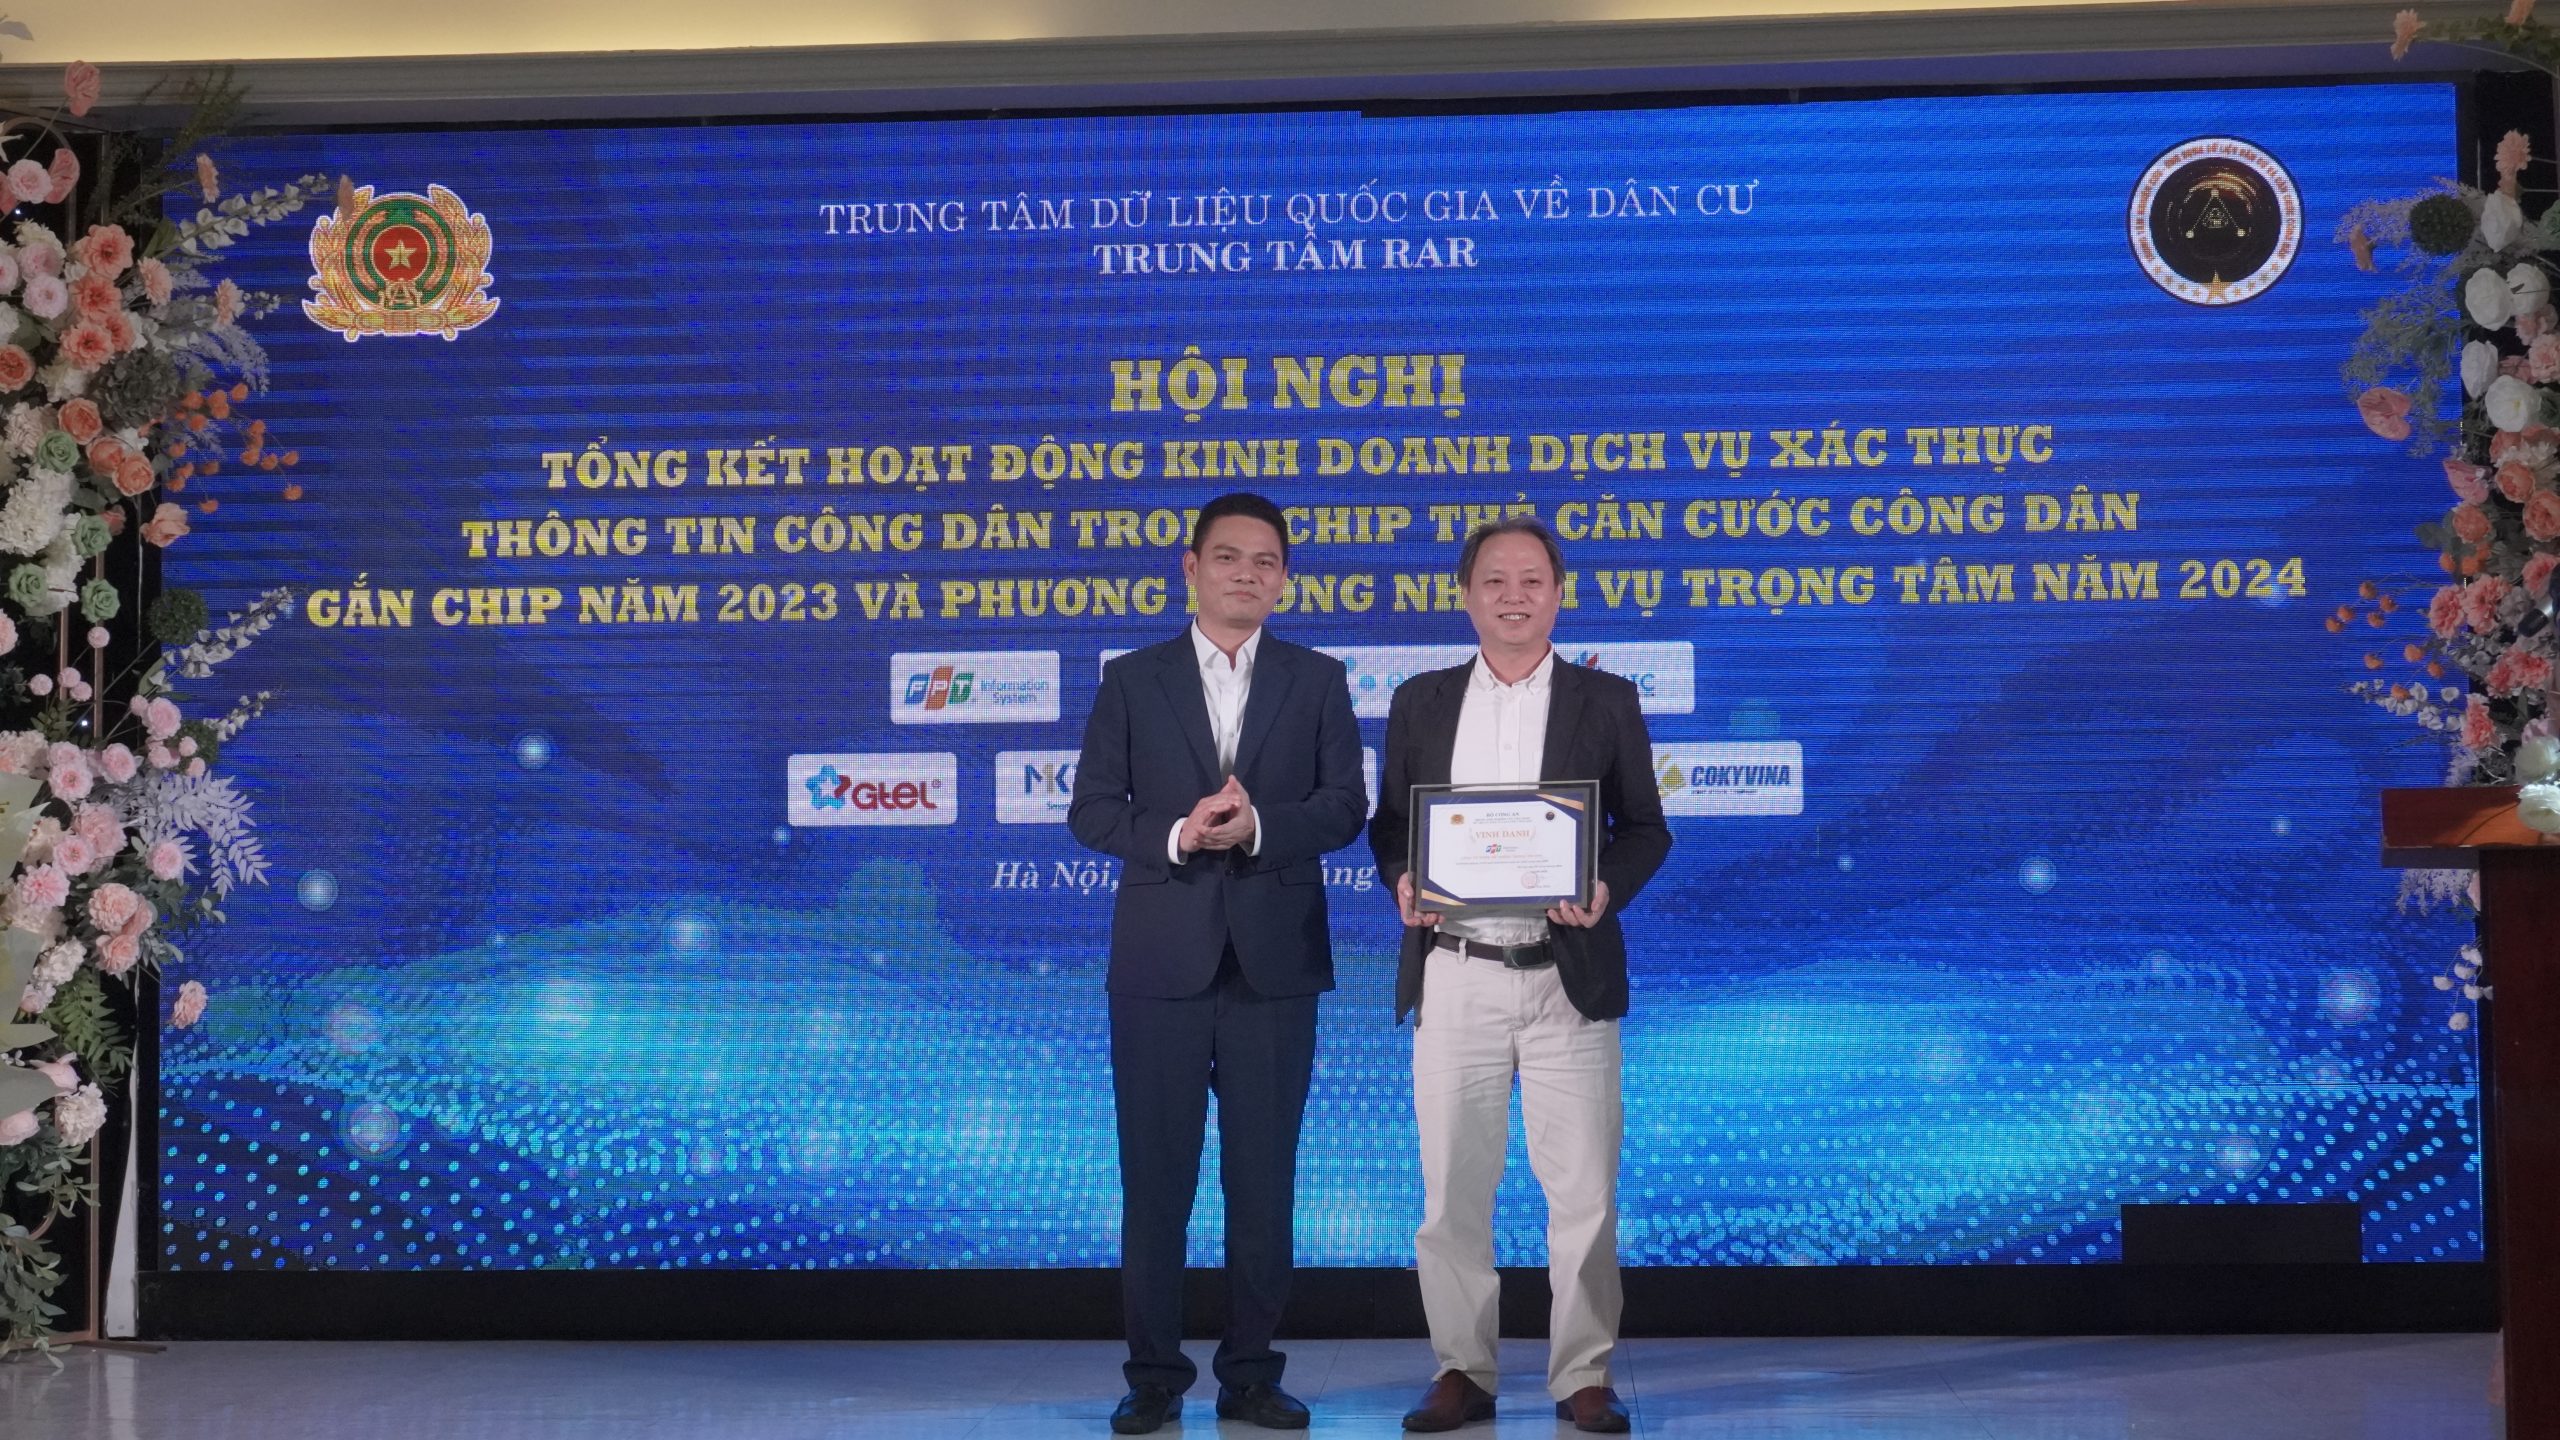 Certificate of Merit from the Vietnam Ministry of Public Security for the achievement of bringing Project 06 into practice – Best performance company in 2023 category